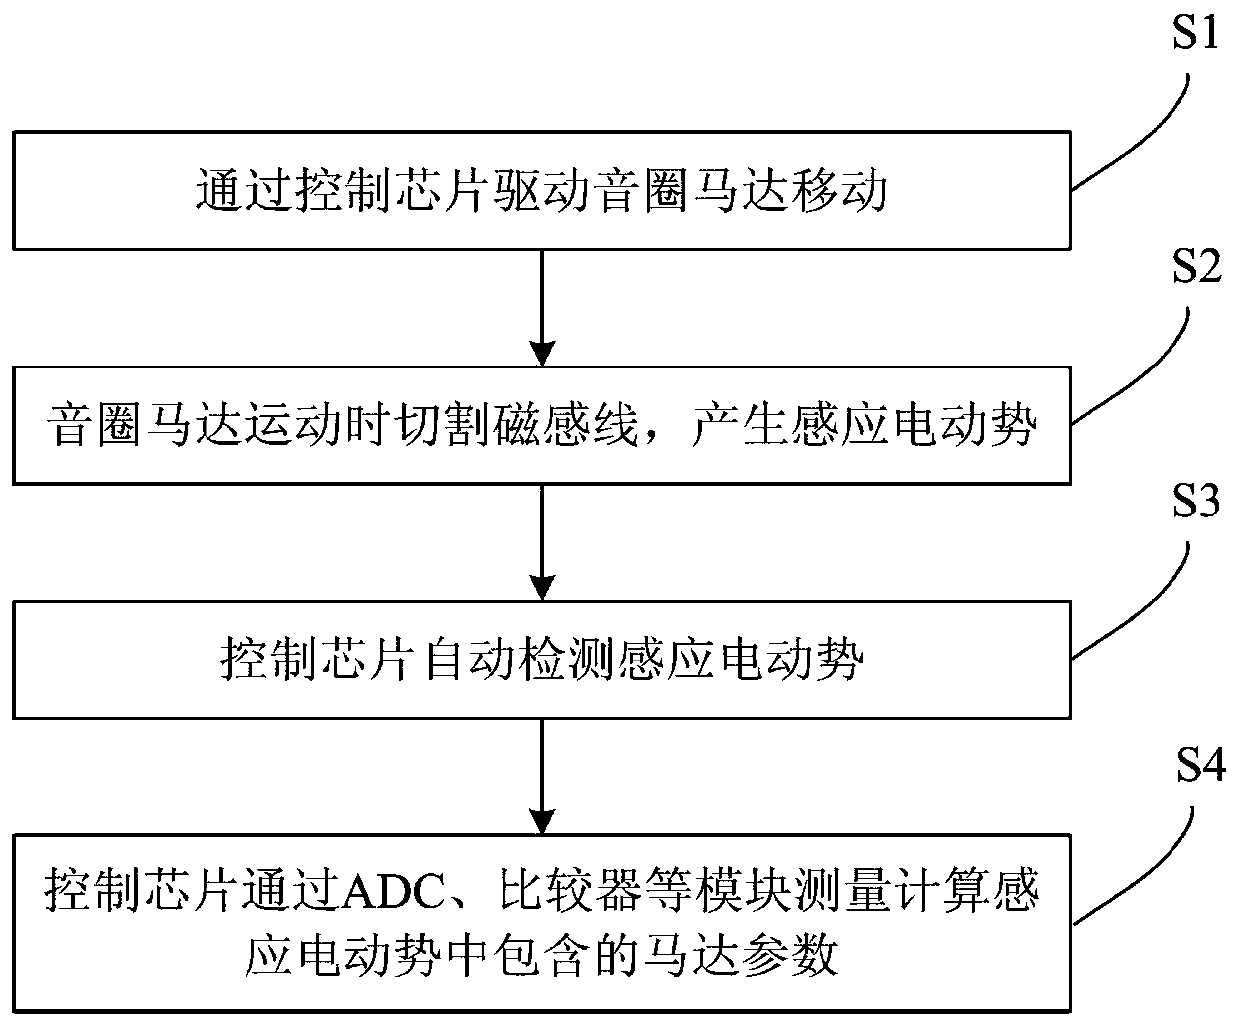 Self-detection method for voice coil motor parameters